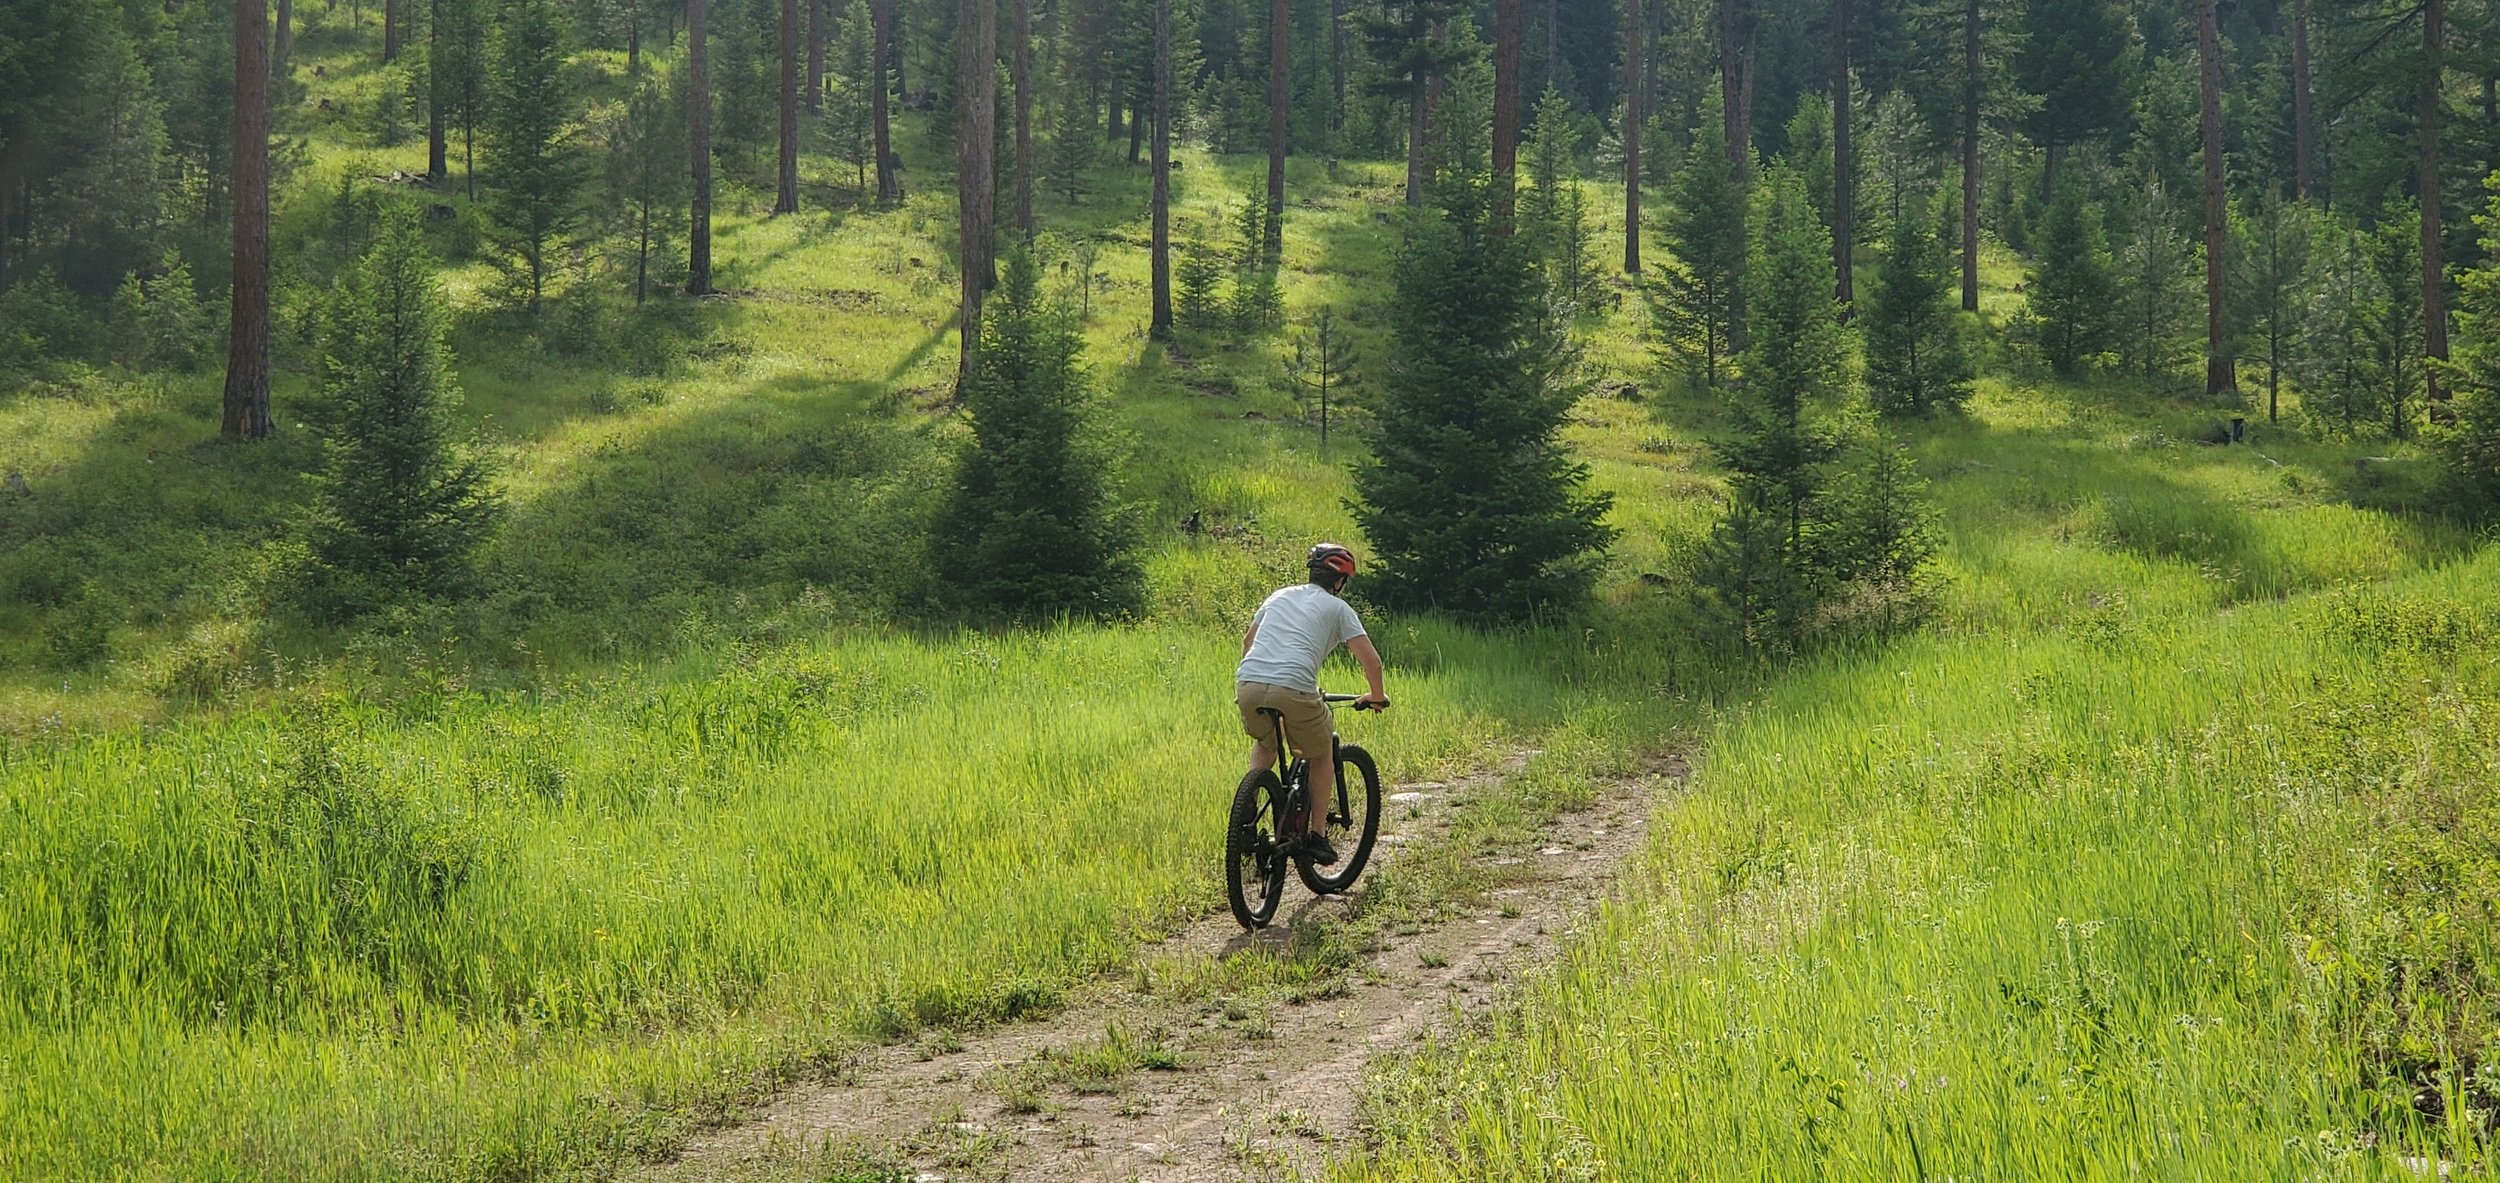 Bring your mountain bike and enjoy our trails at The Hohnstead Glamping Cabins Resort near Missoula, Montana